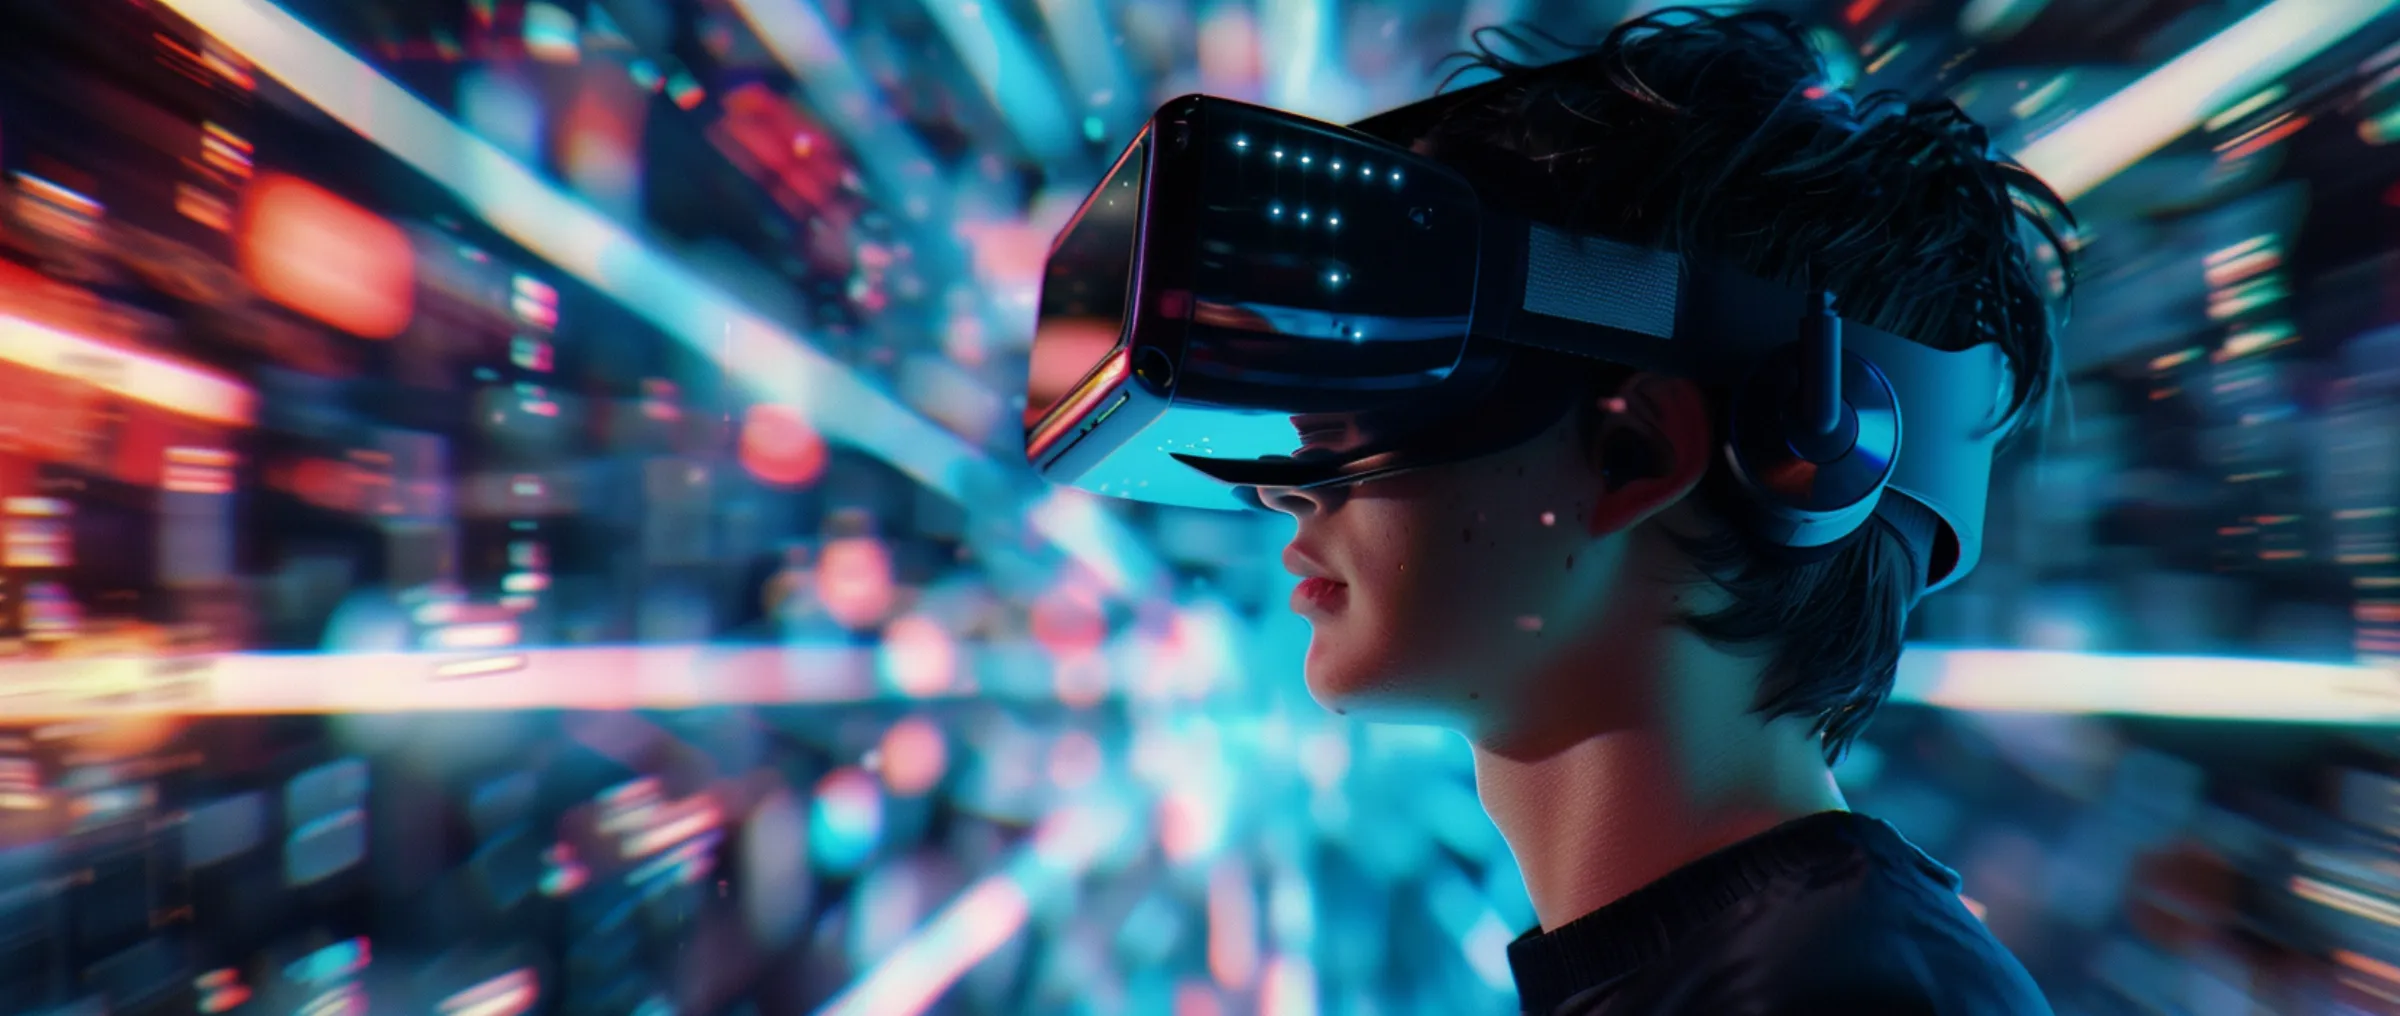 Nokia is counting on the prospects of the metaverse in its strategy until 2030